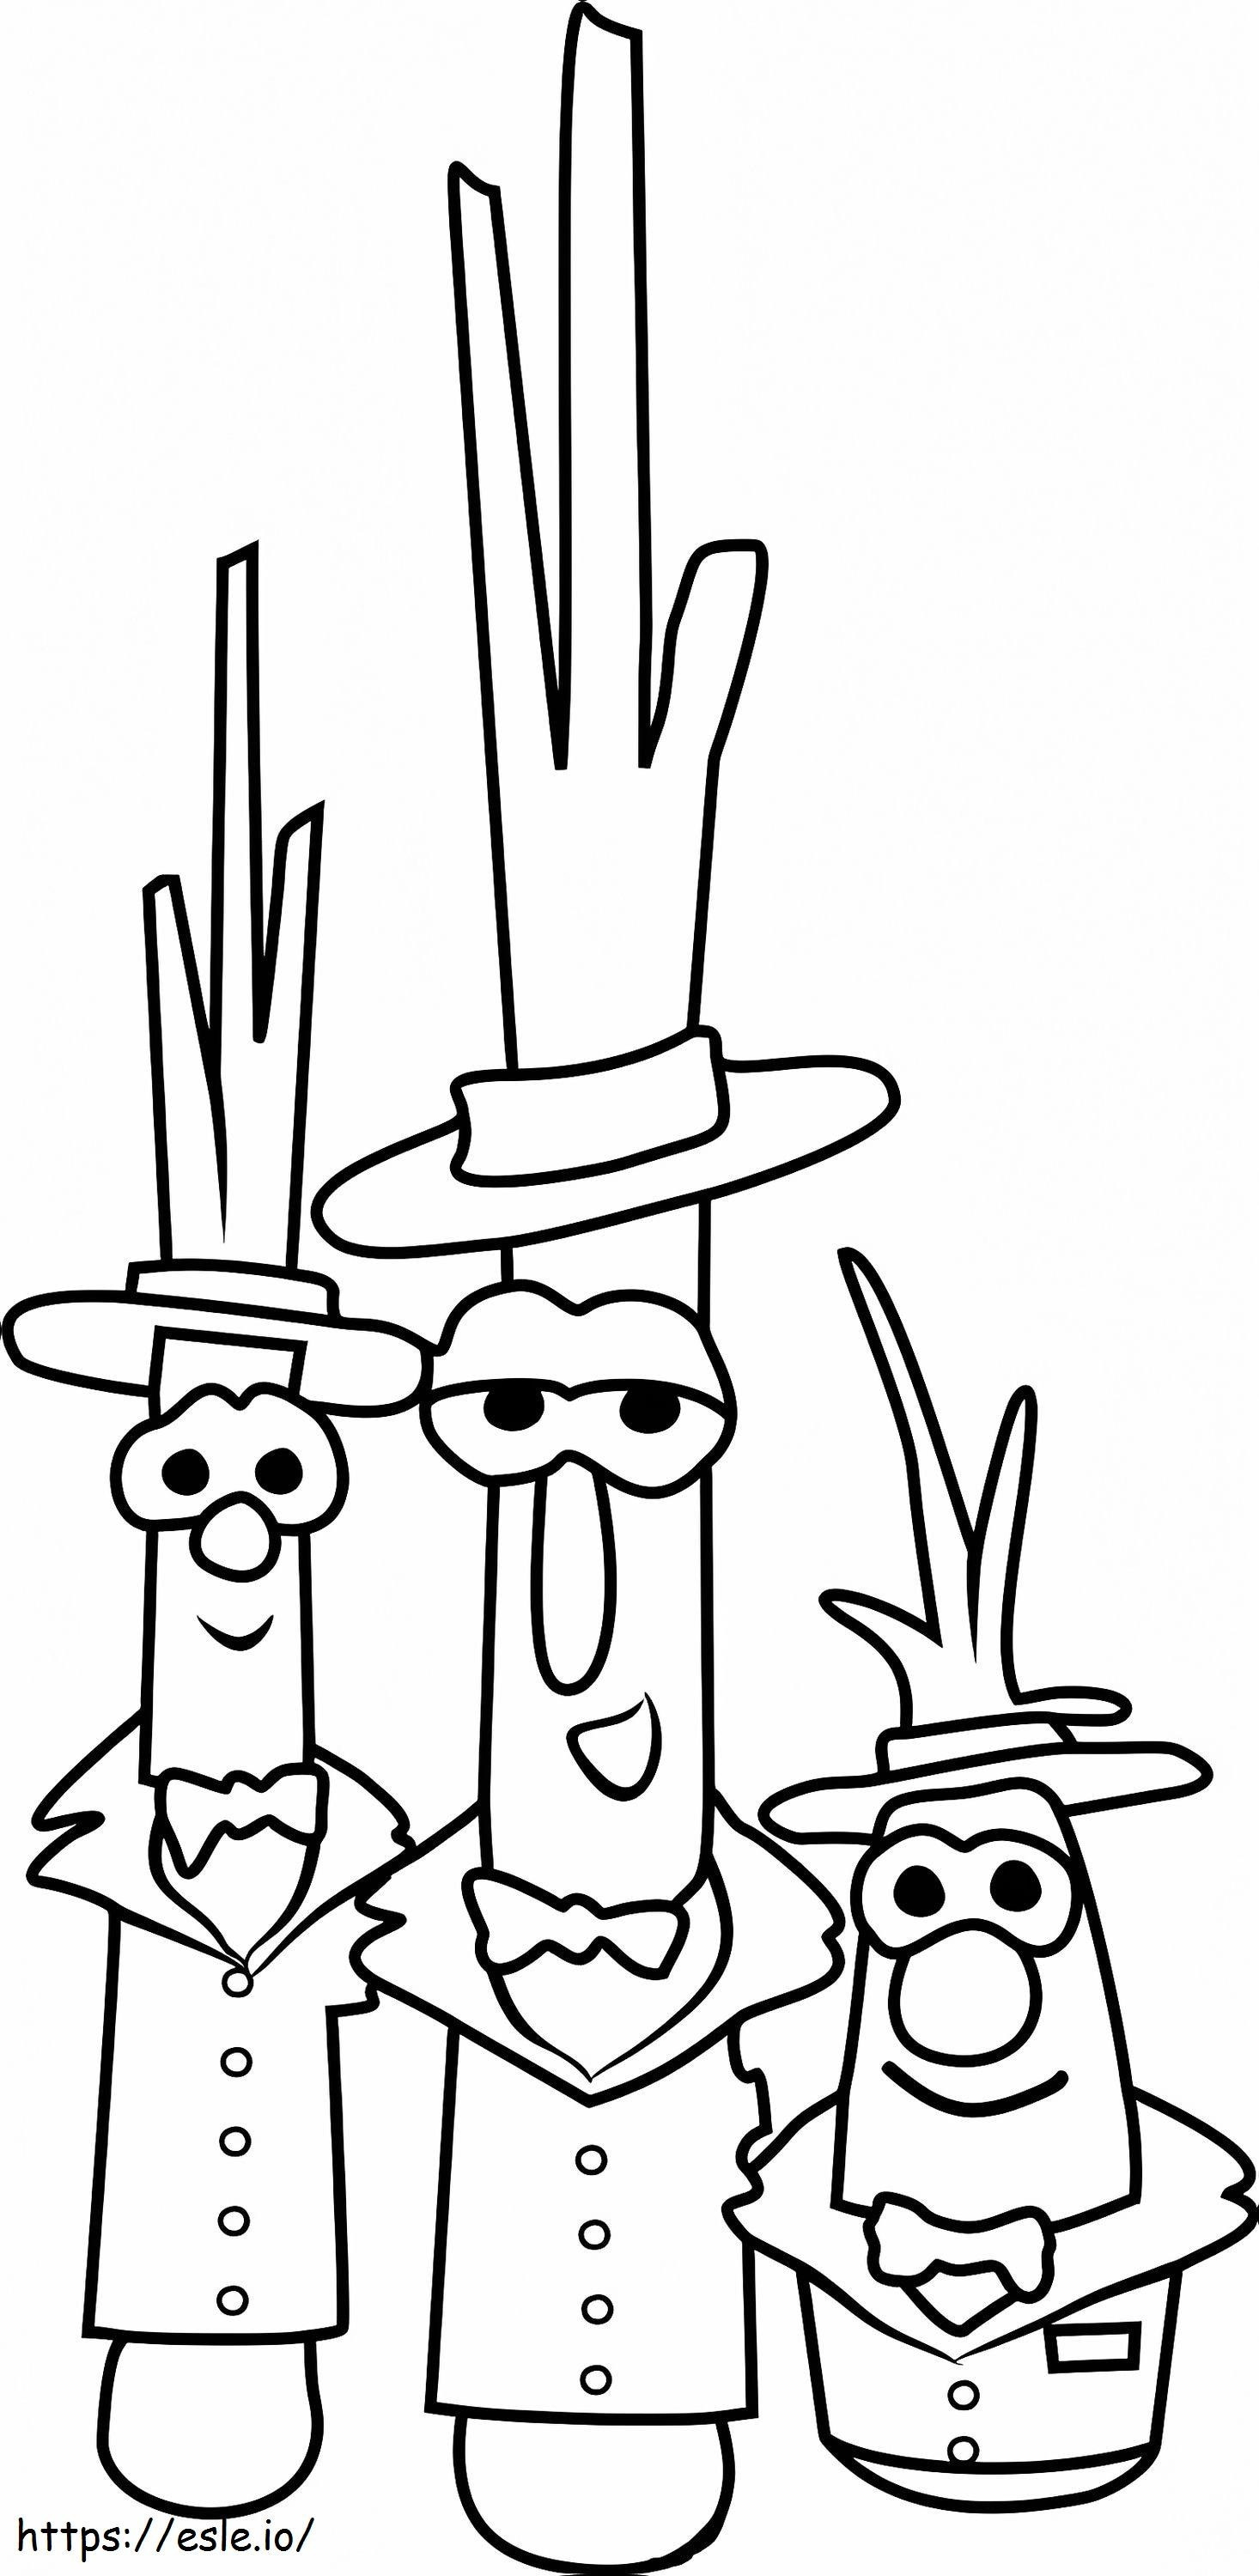 1531362922 The Scallions A4 coloring page